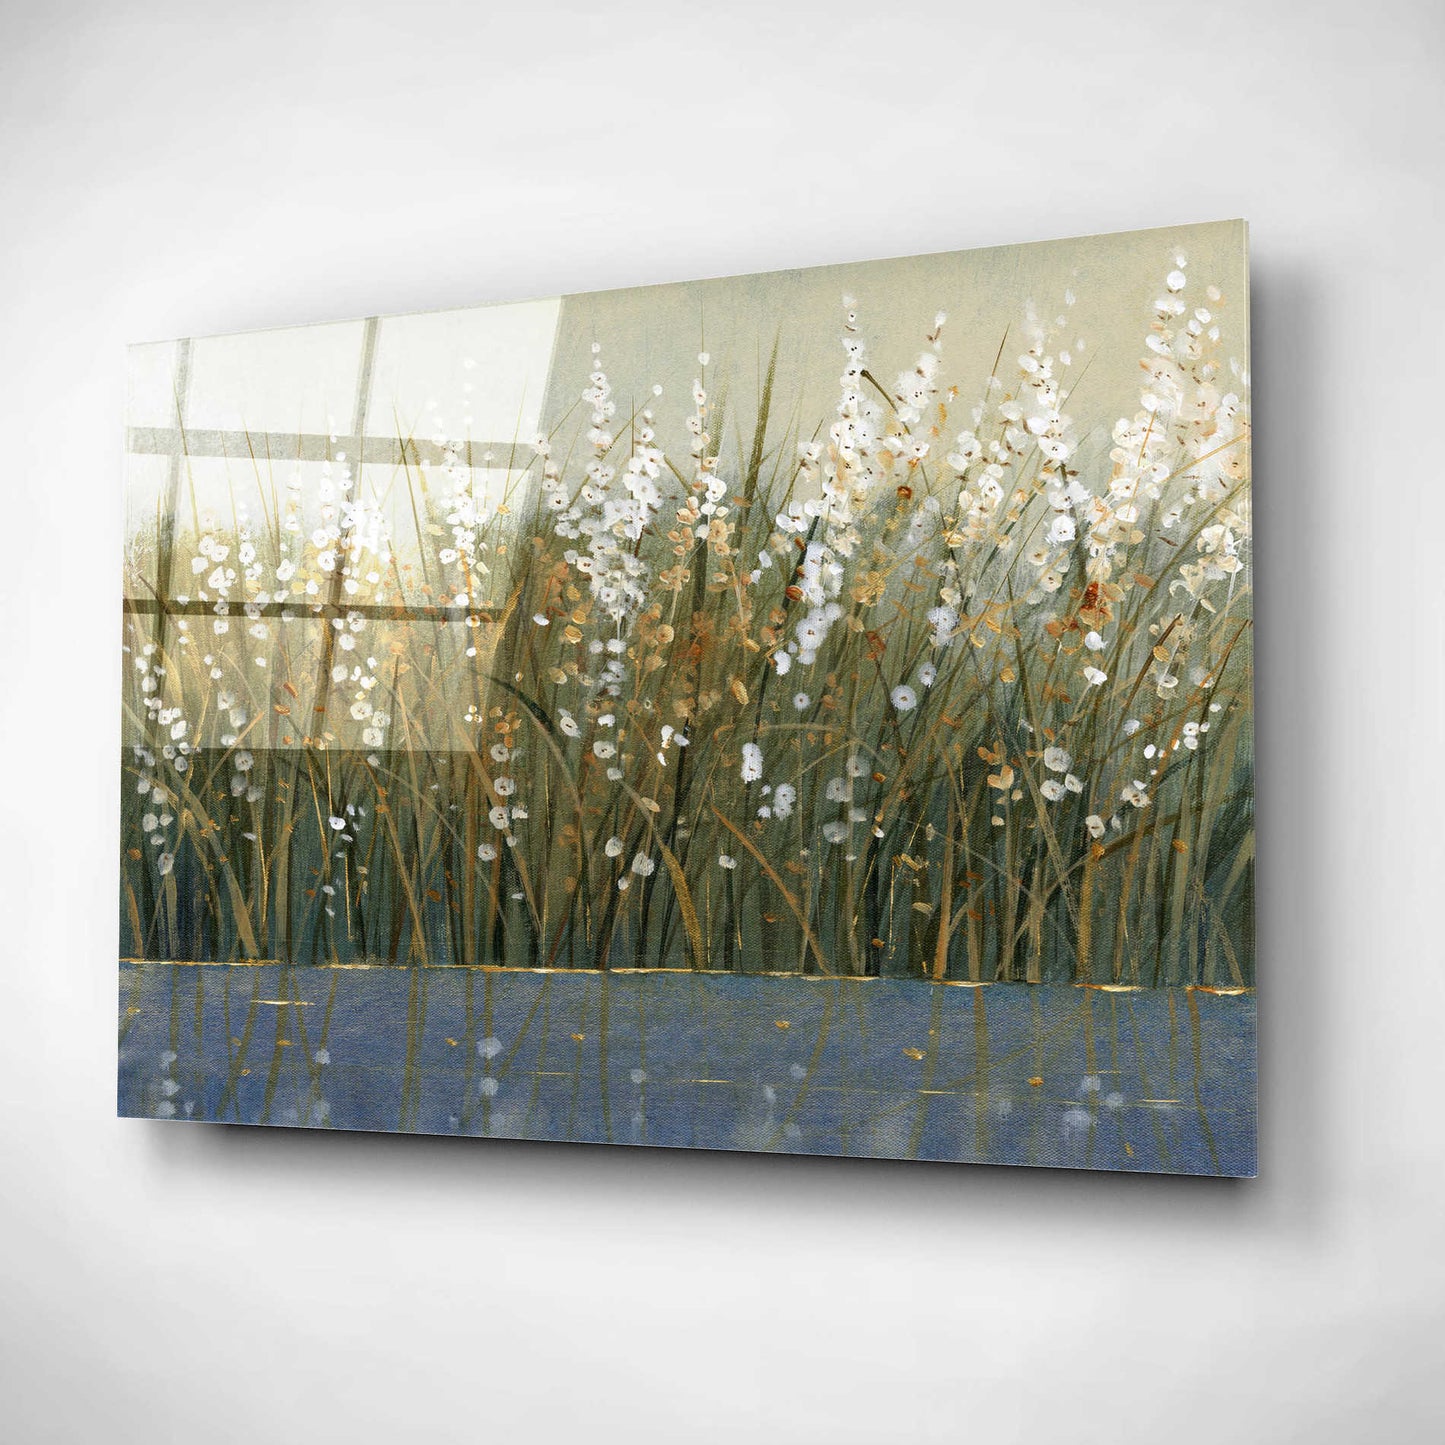 Epic Art 'By the Tall Grass II' by Tim O'Toole, Acrylic Glass Wall Art,16x12